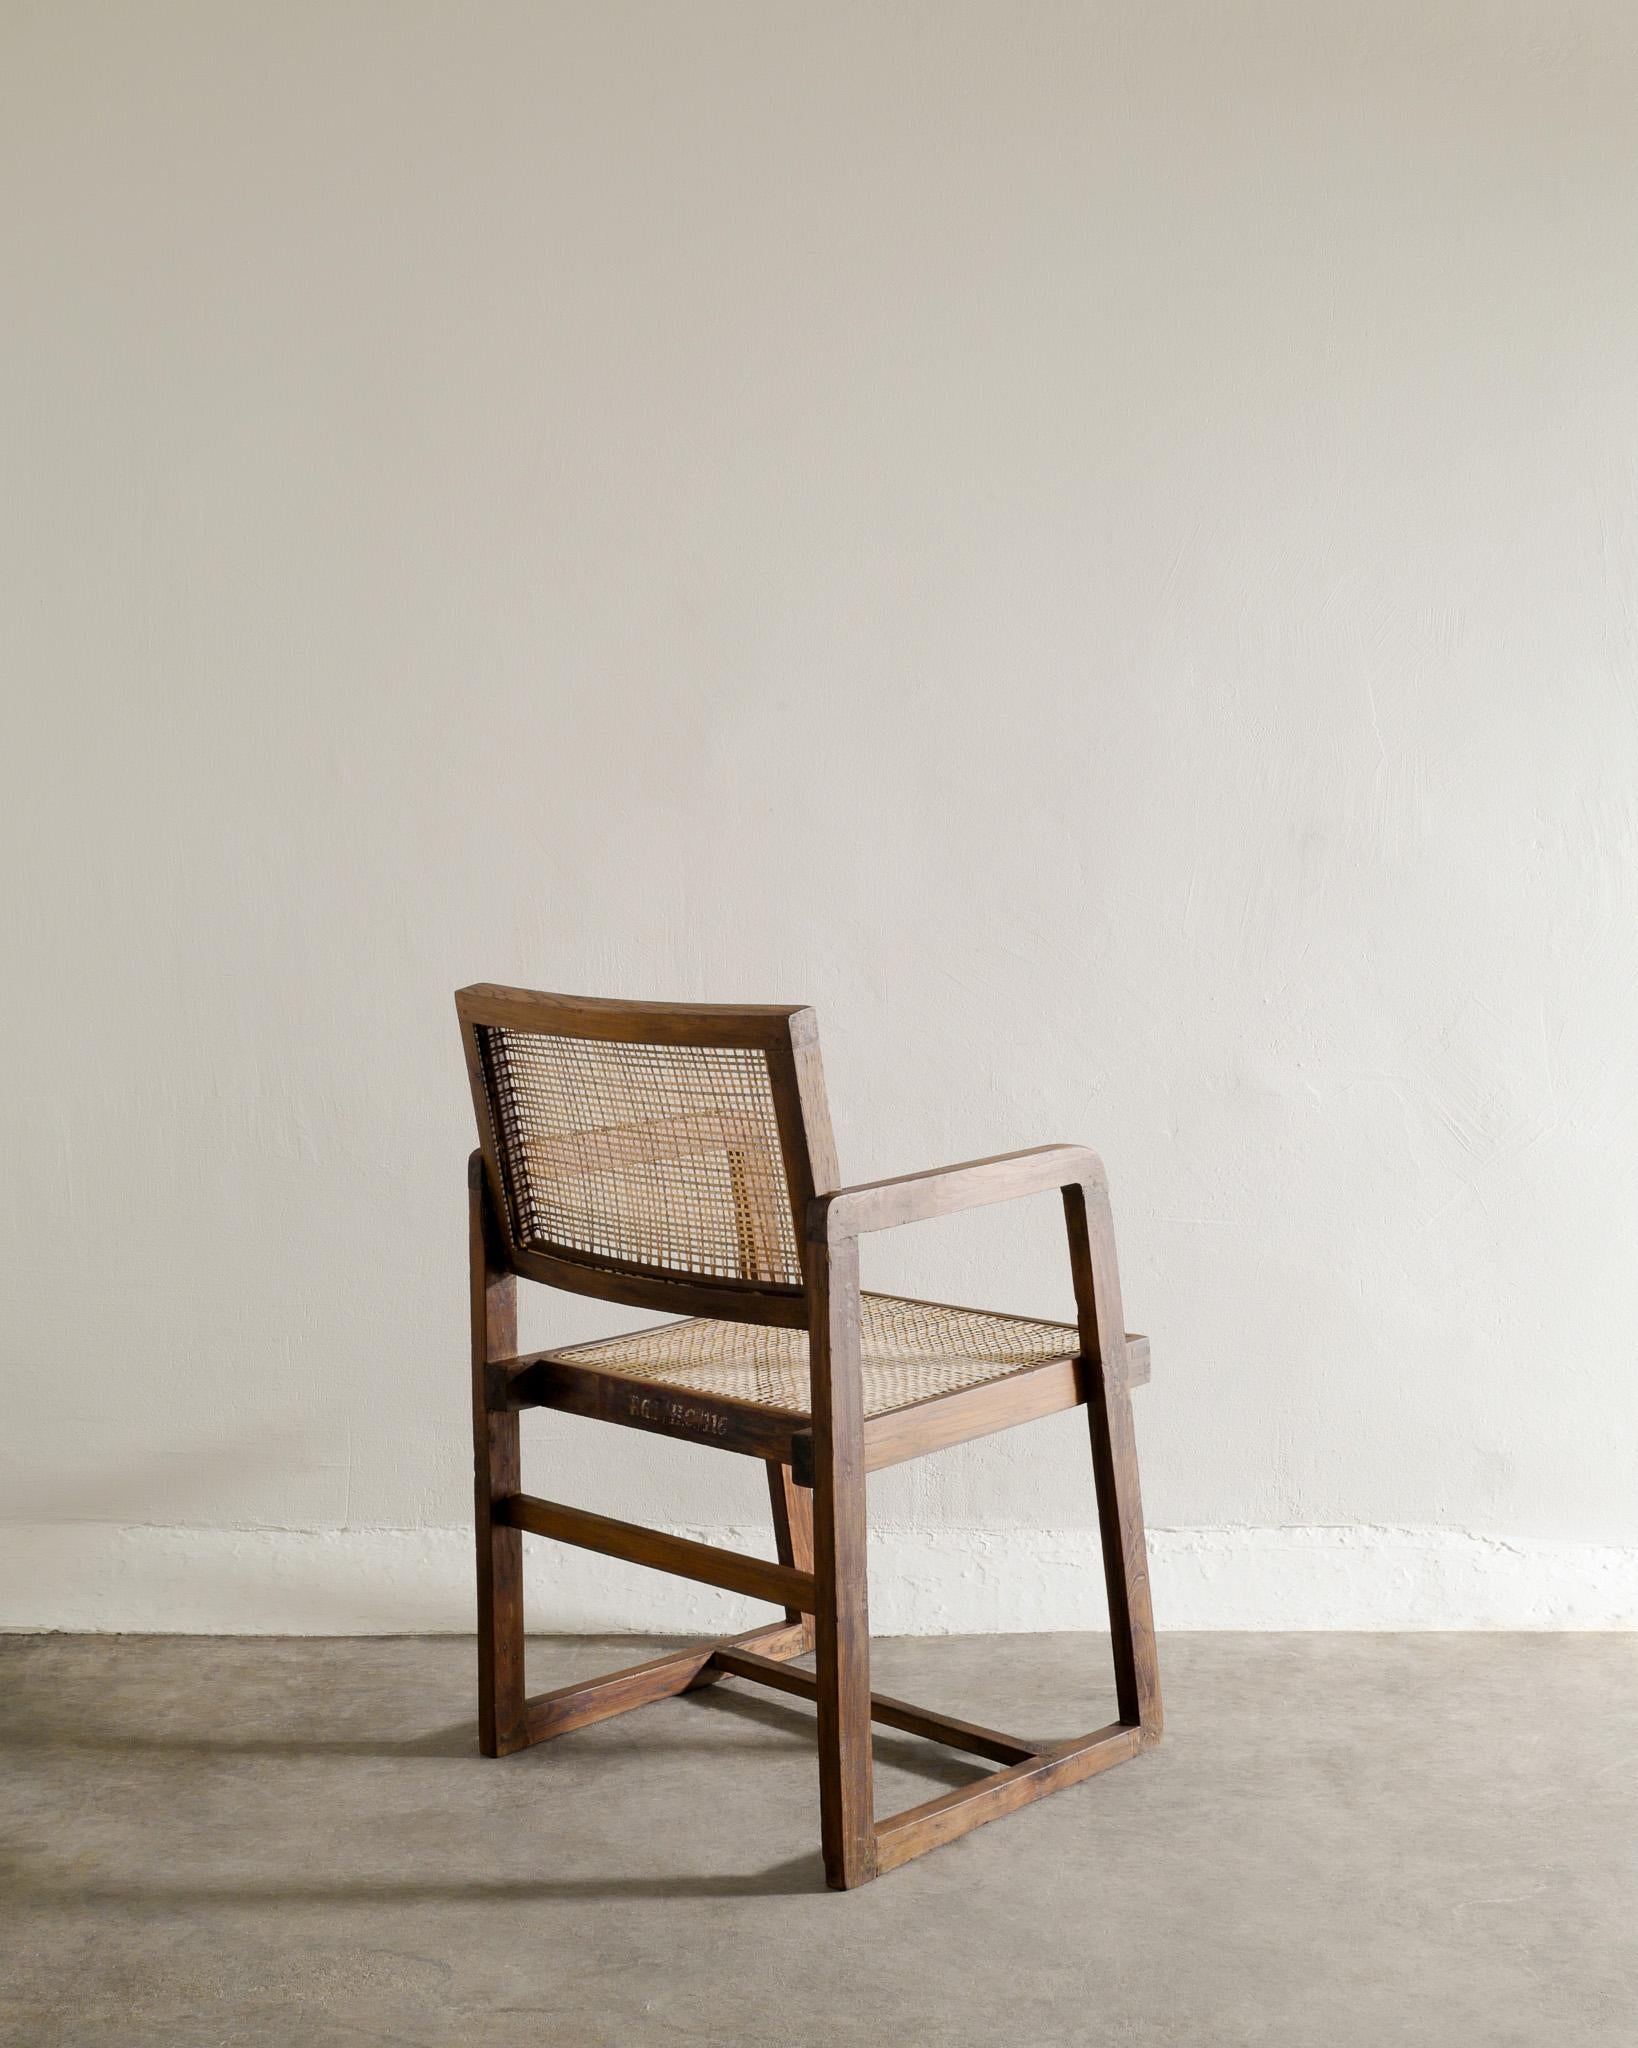 Very rare mid century office dining chair in solid stained teak and rattan by Pierre Jeanneret / Le Corbusier for their Chandigarh project in India 1950s. In good condition and professionally cleaned by us. Signed with a nice lettering on the back